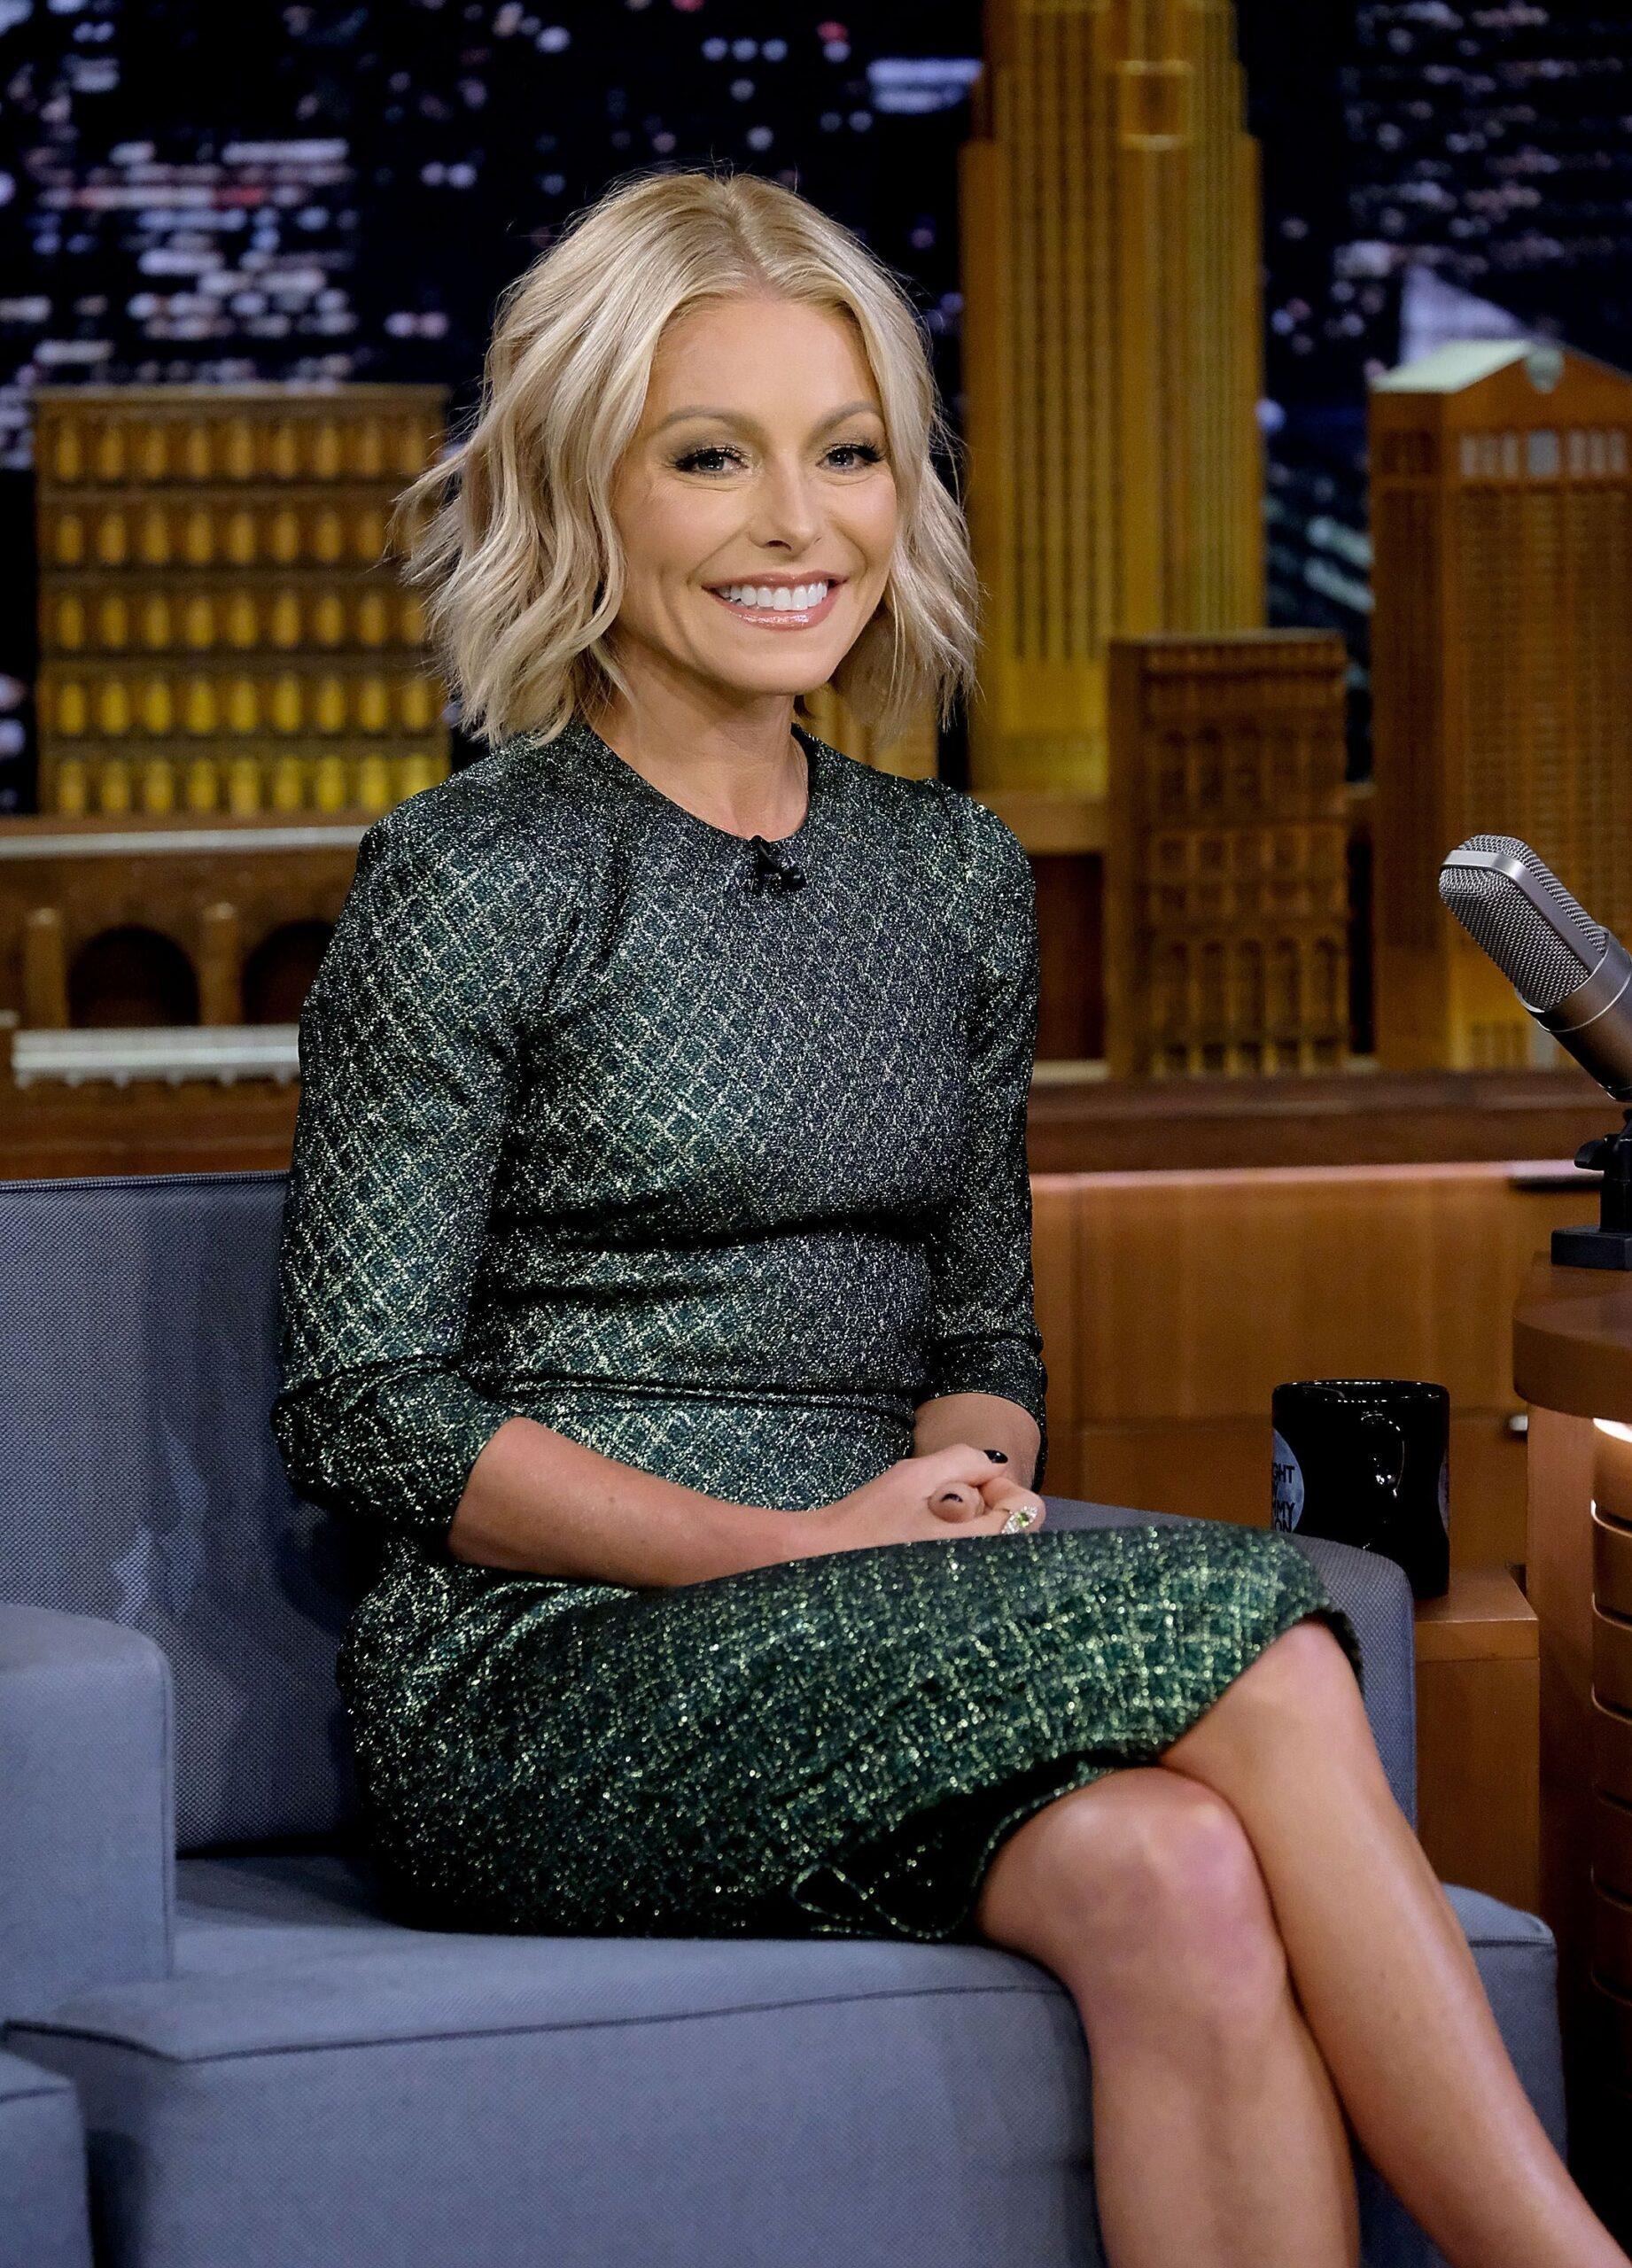 Kelly Ripa (host) Wiki, biography, age, height, weight, husband, children, net worth, family, facts